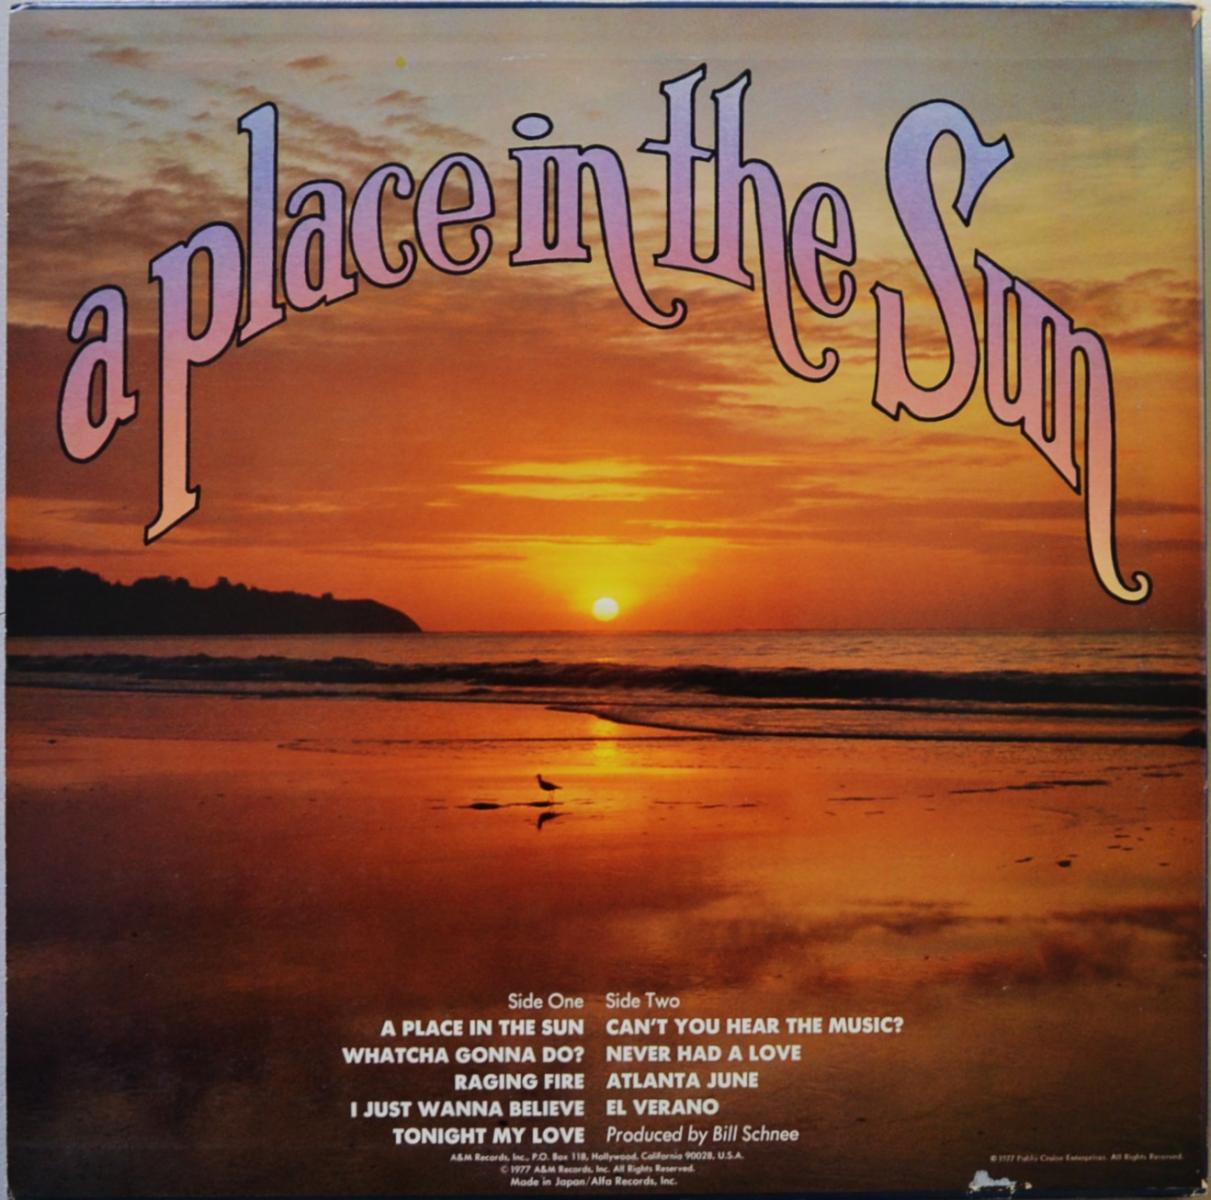 pablo cruise find your place in the sun